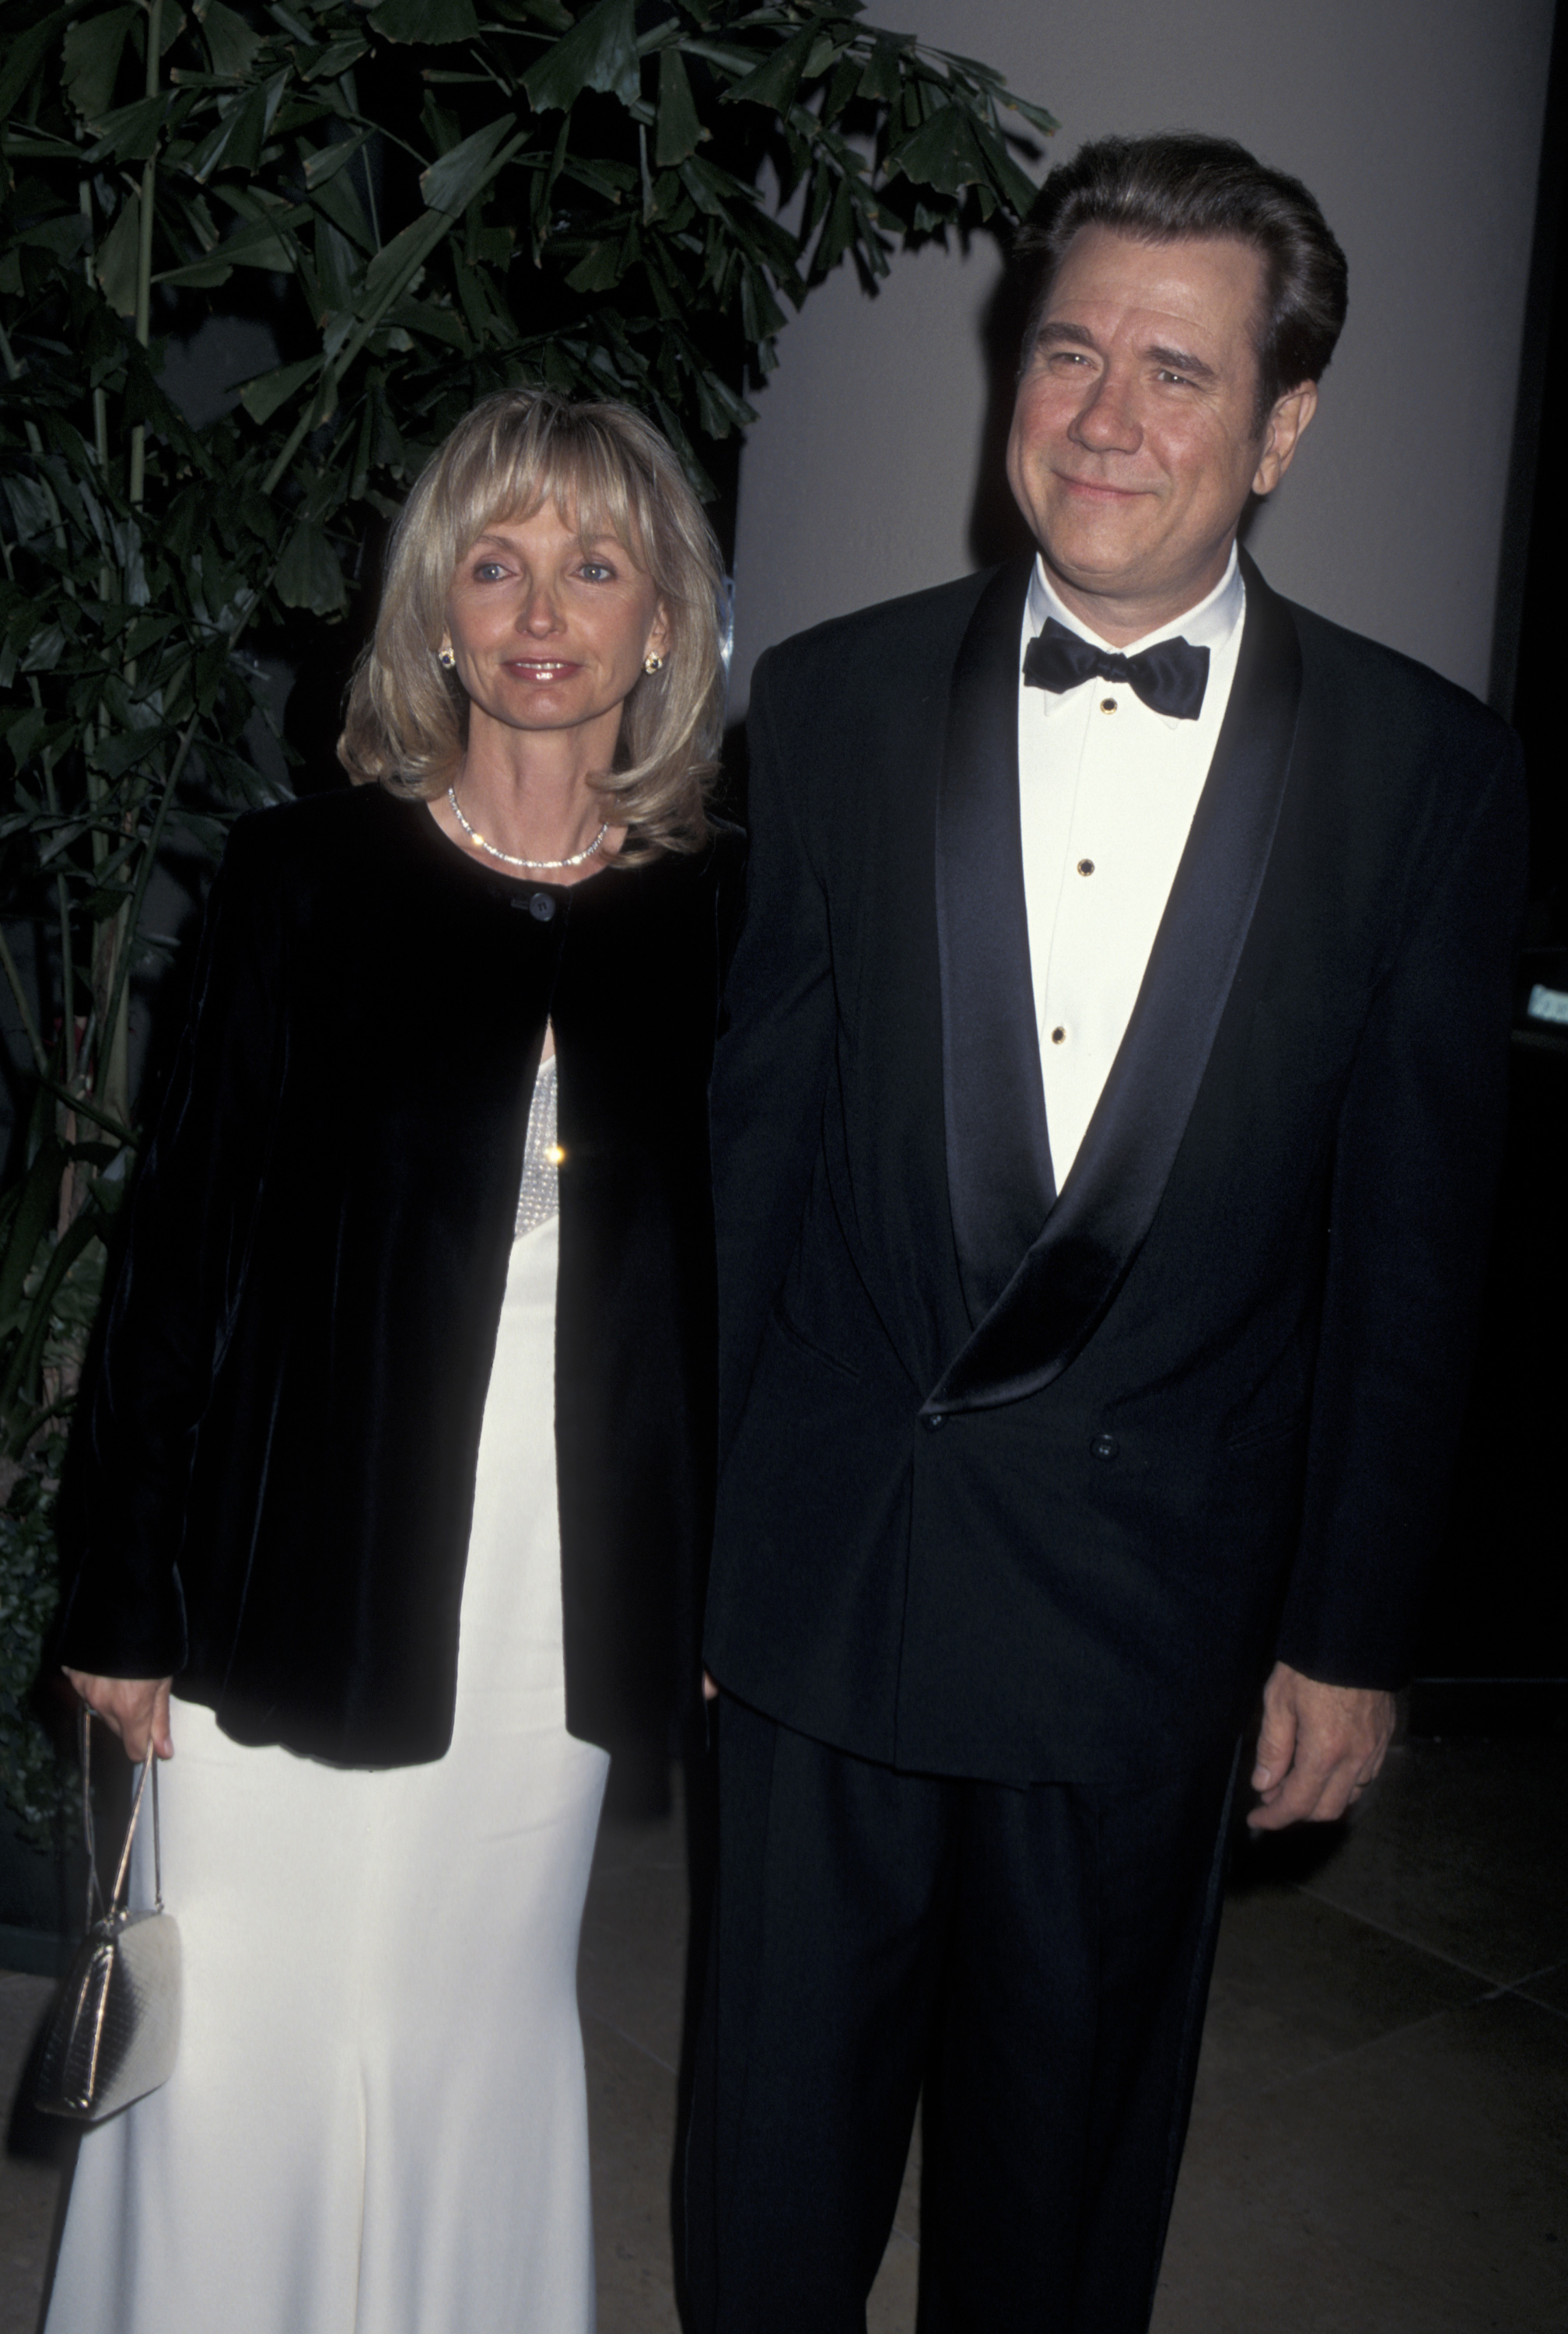 John Larroquette and Elizabeth Cookson at the Fundraiser Gala for St. Jude Children's Hospital in 1996. | Source: Getty Images